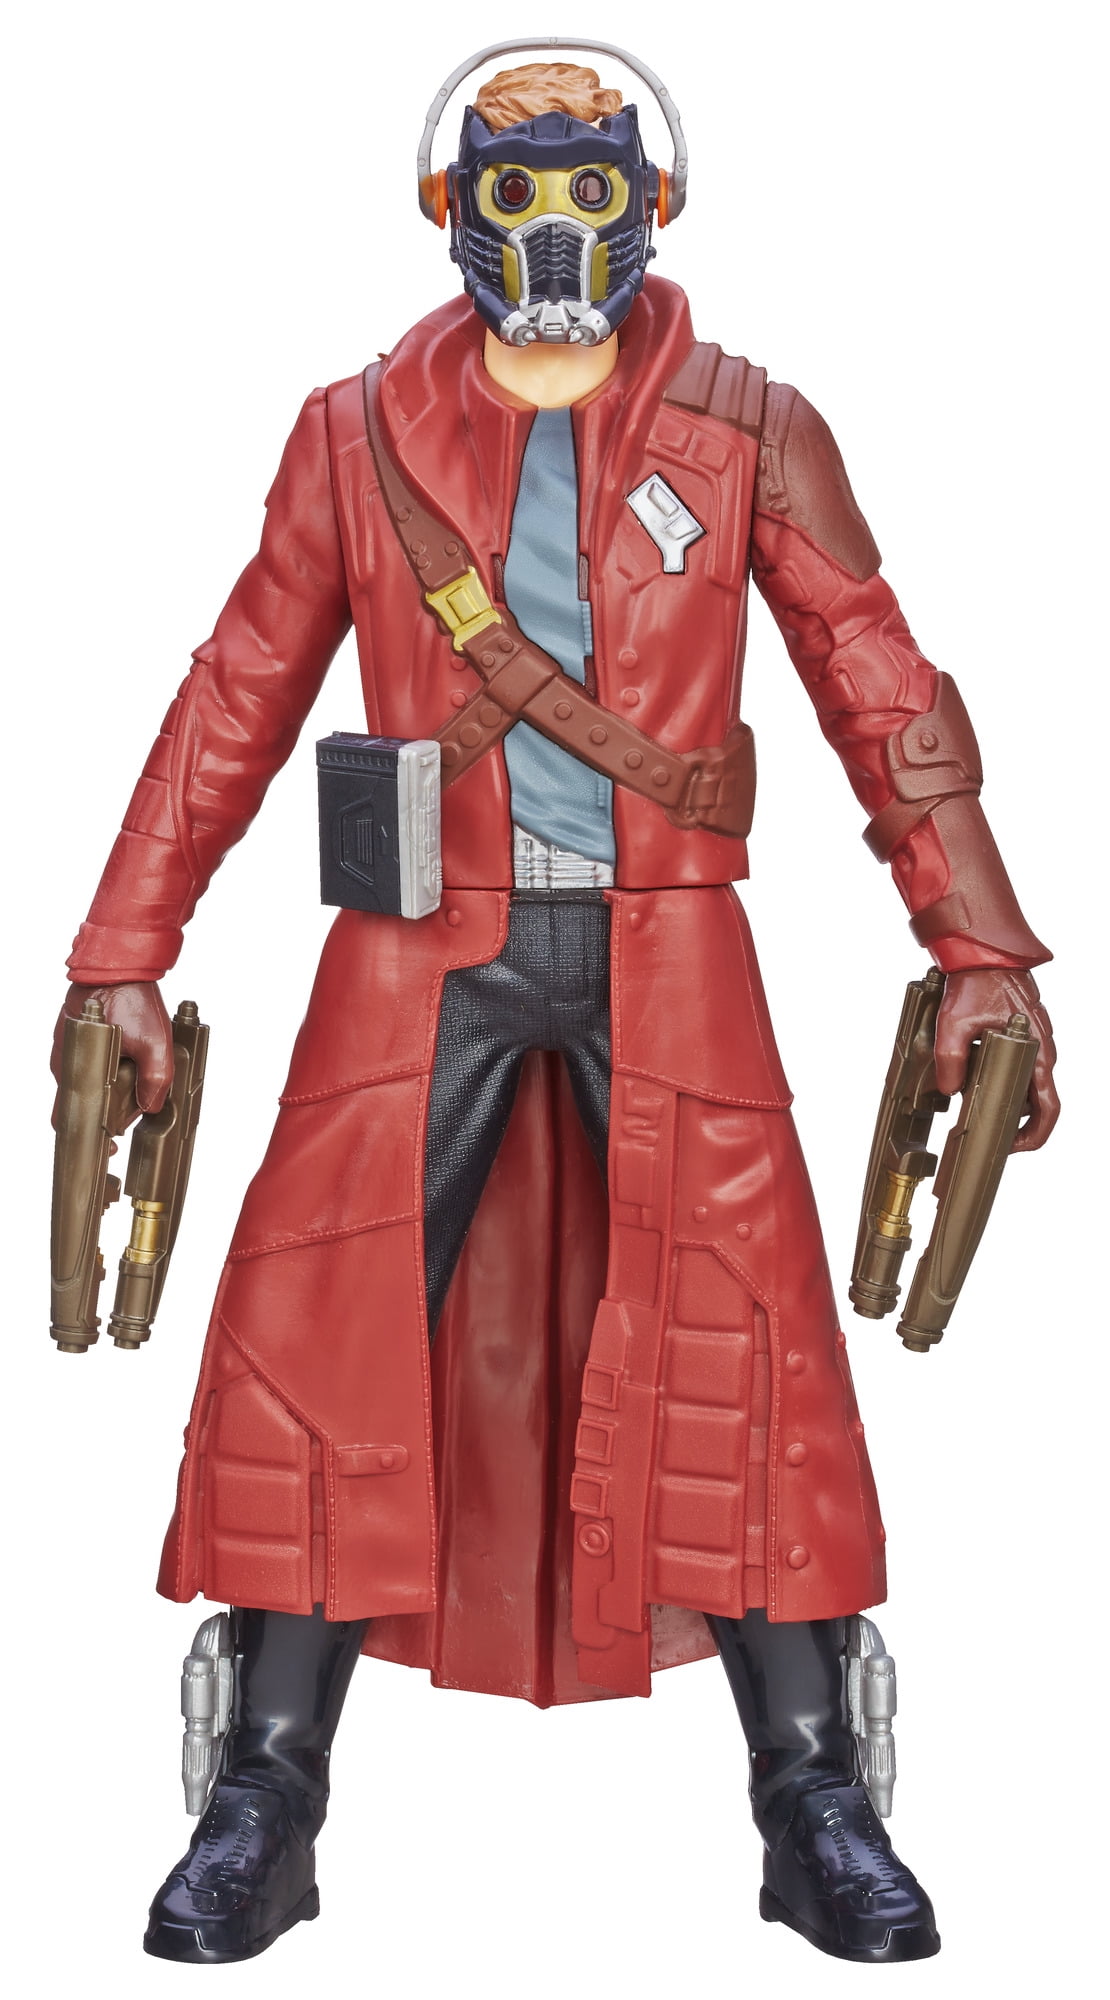 ca 14 cm ACTIONFIGUR HASBRO MARVEL GUARDIANS OF THE GALAXY STAR-LORD 5" INCH 